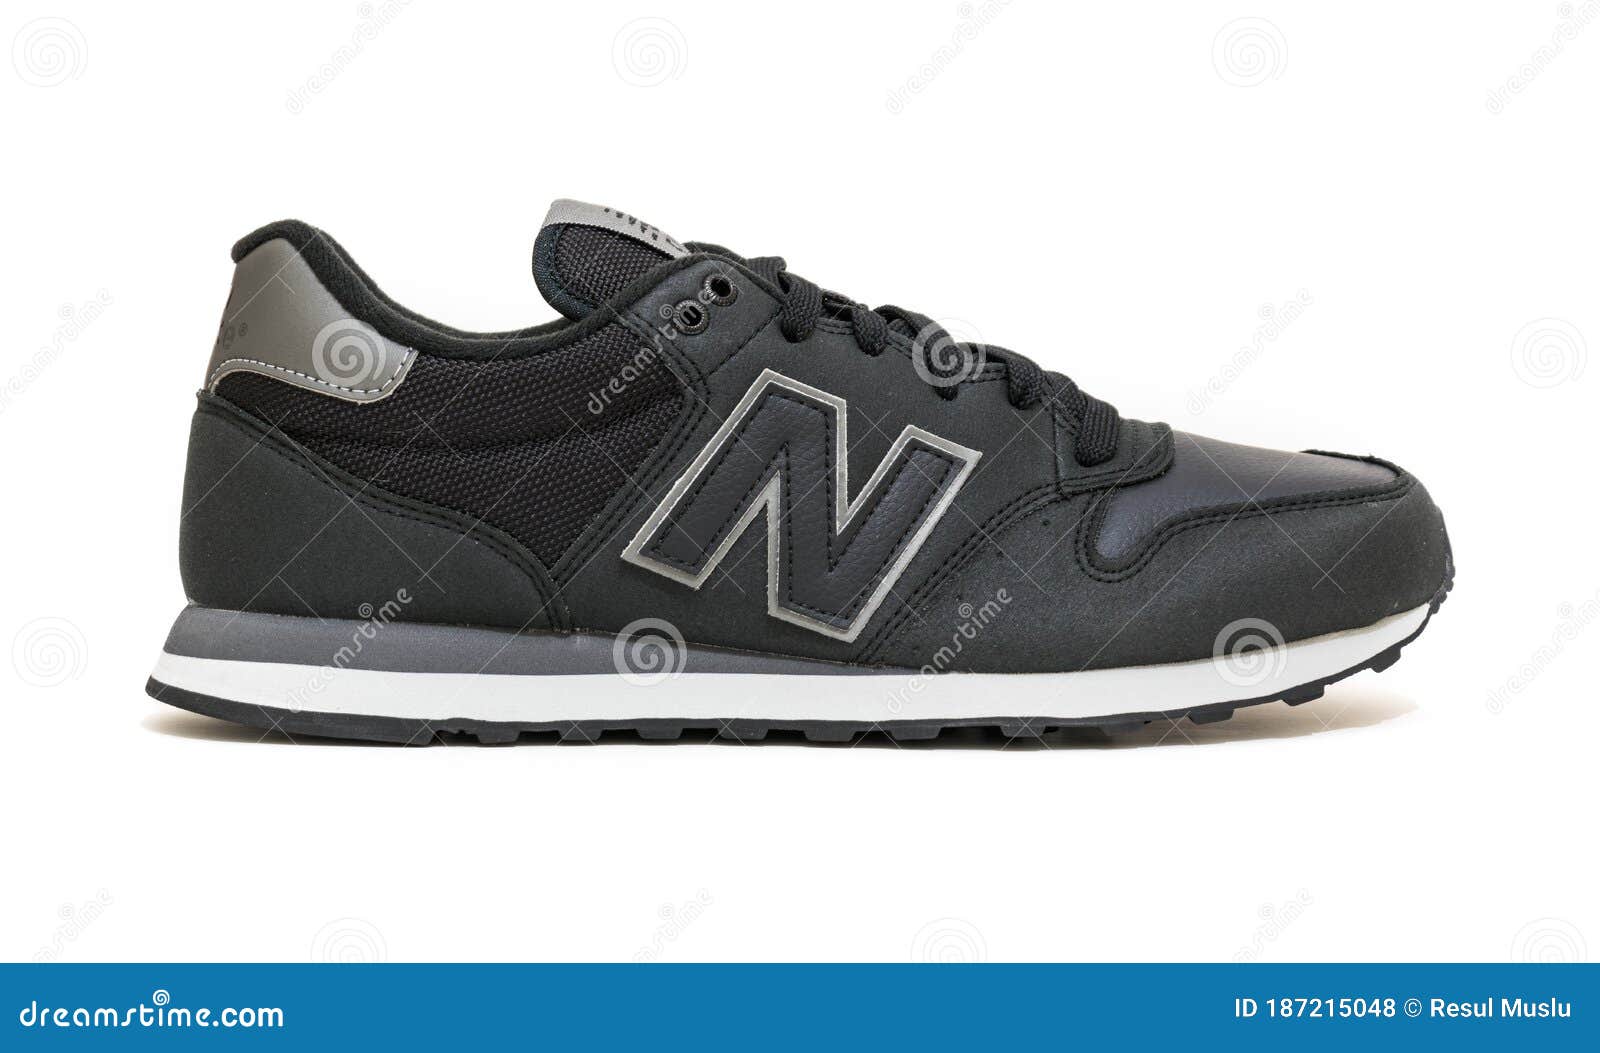 New Balance Shoes Black Color Editorial 